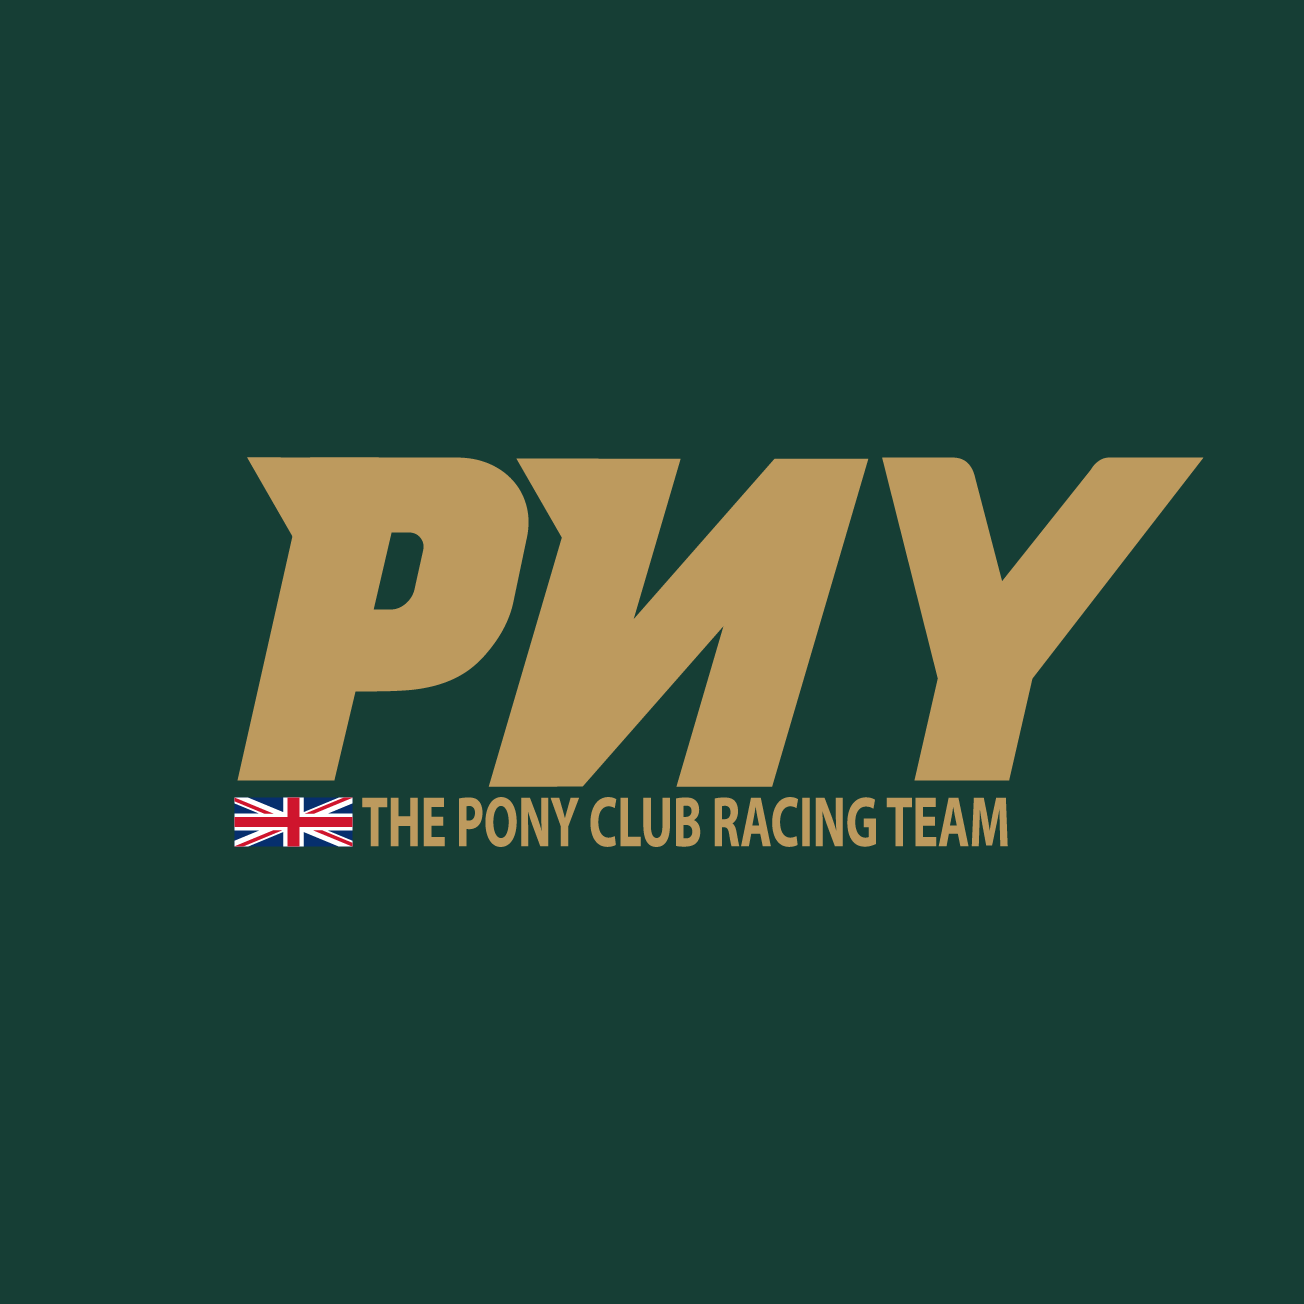 Club Image for PNY